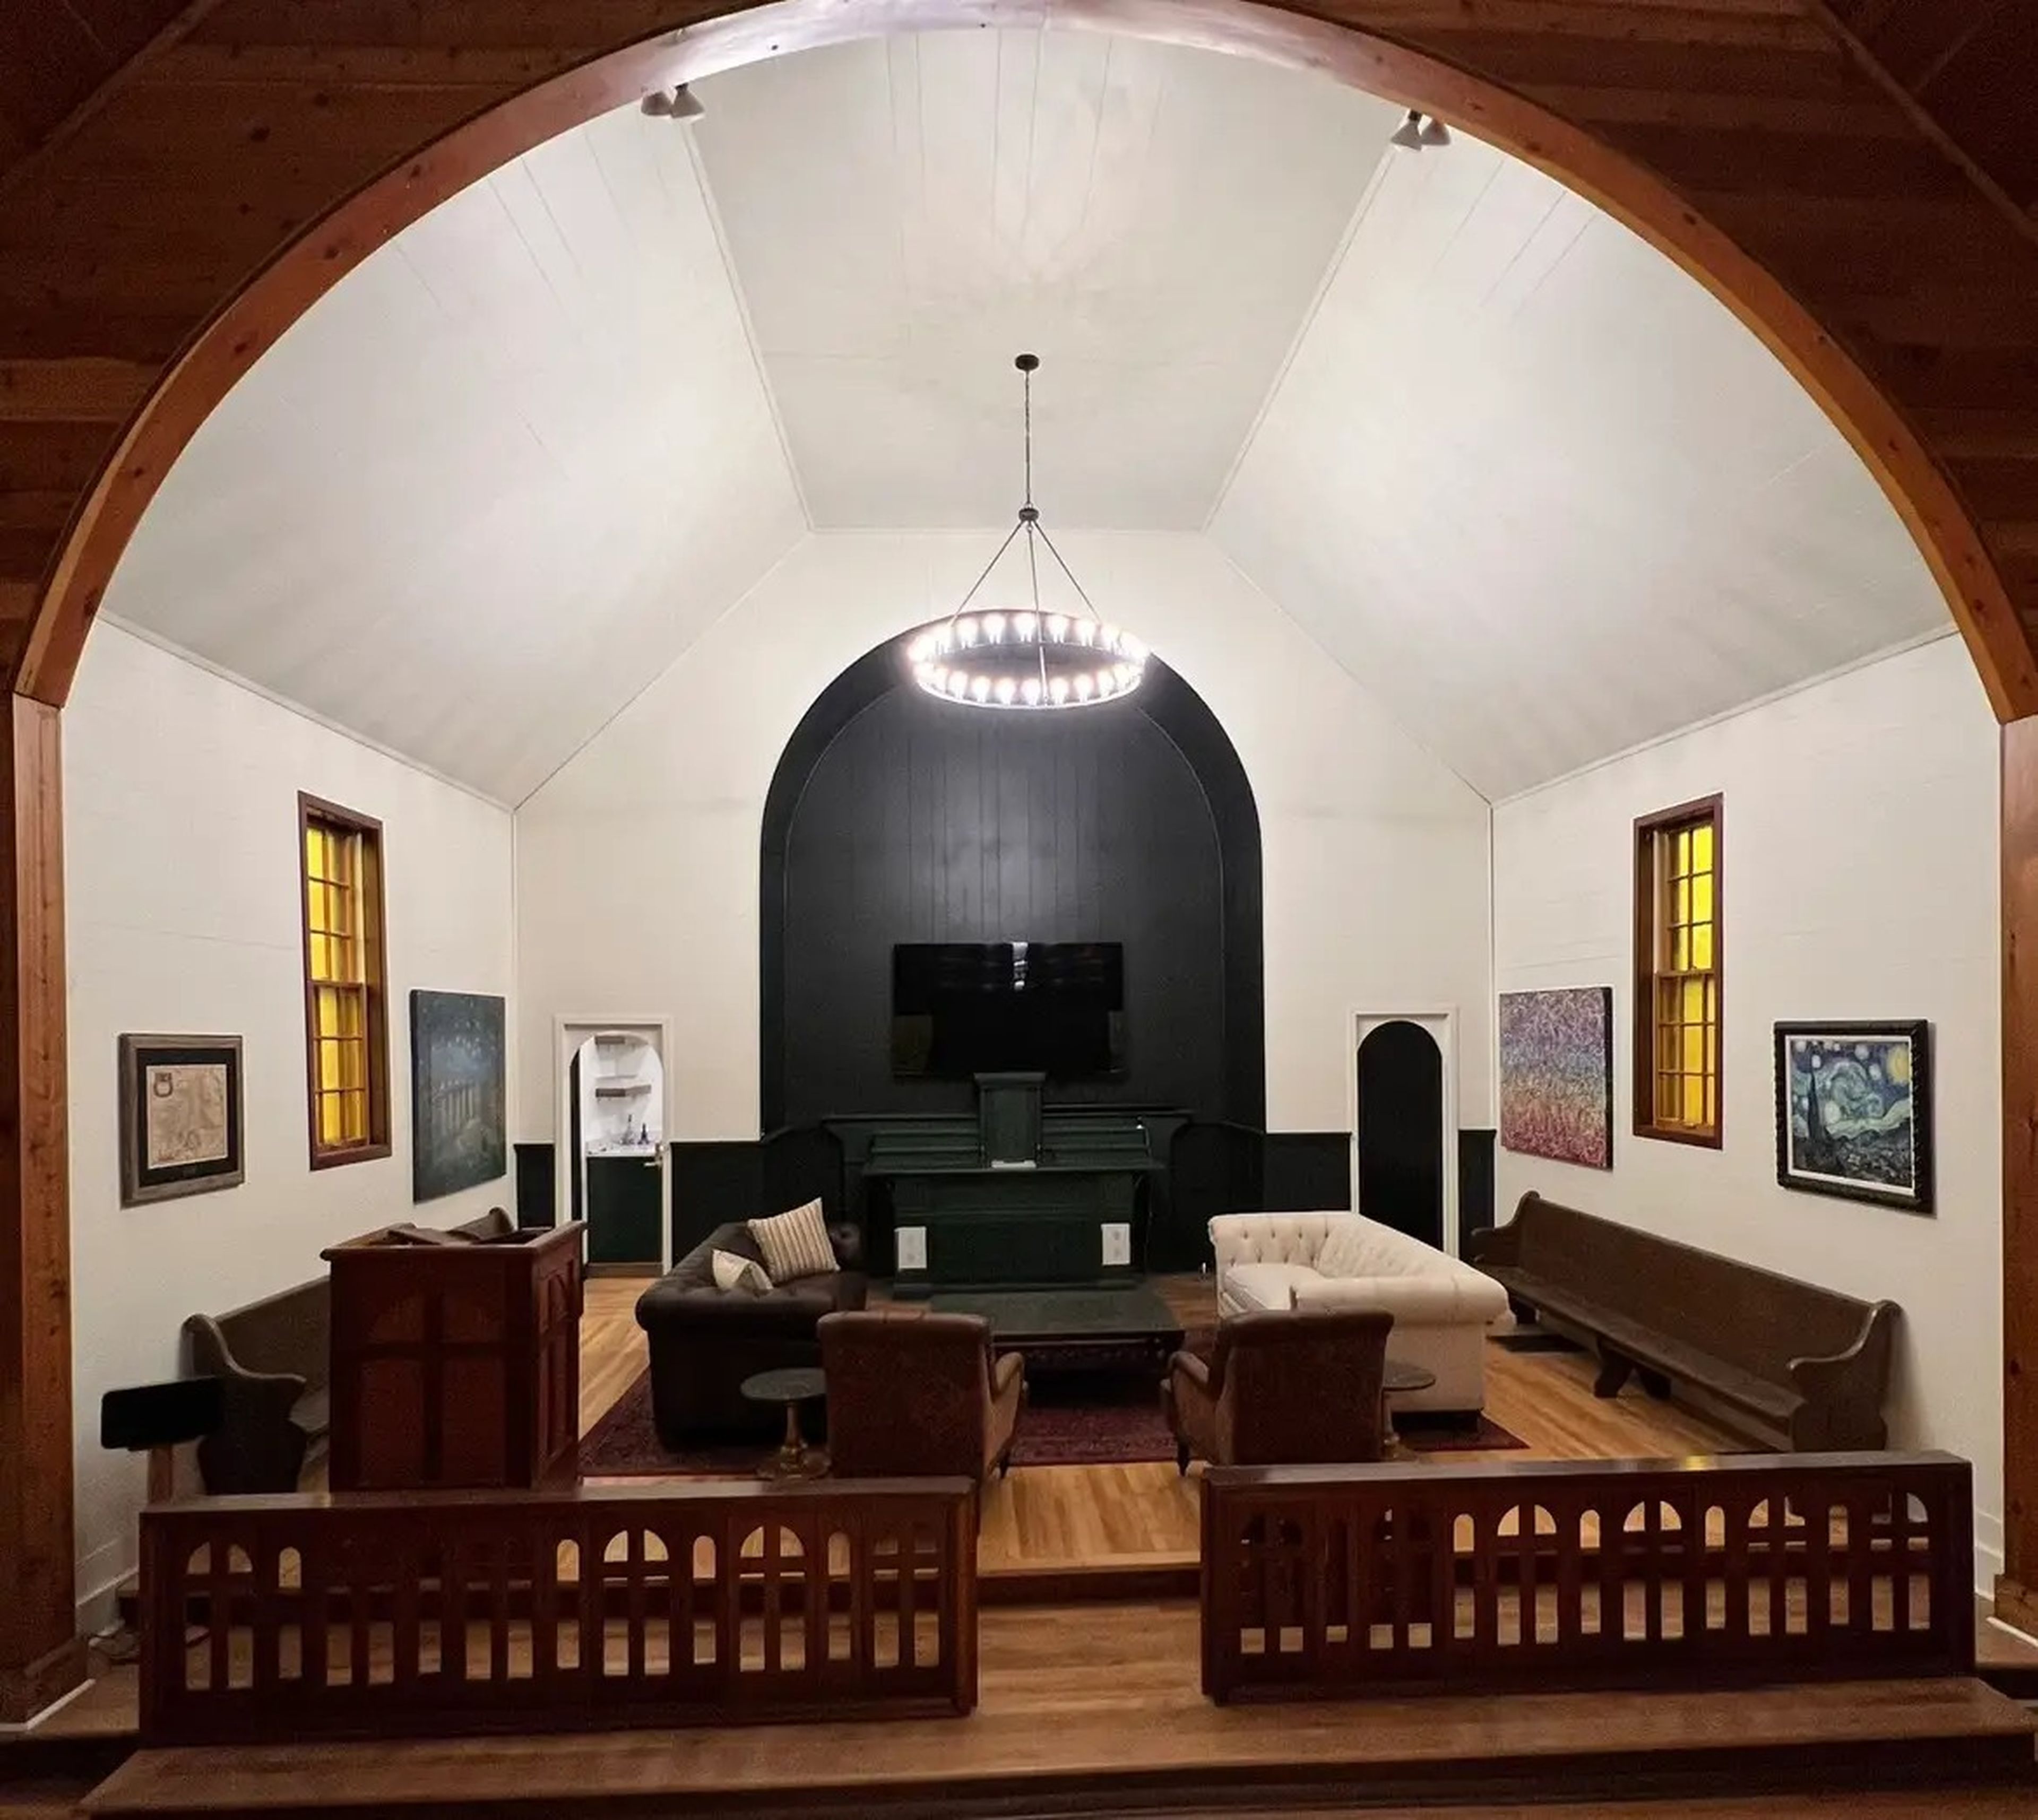 The former apse of a church has been turned into a living room with white walls.